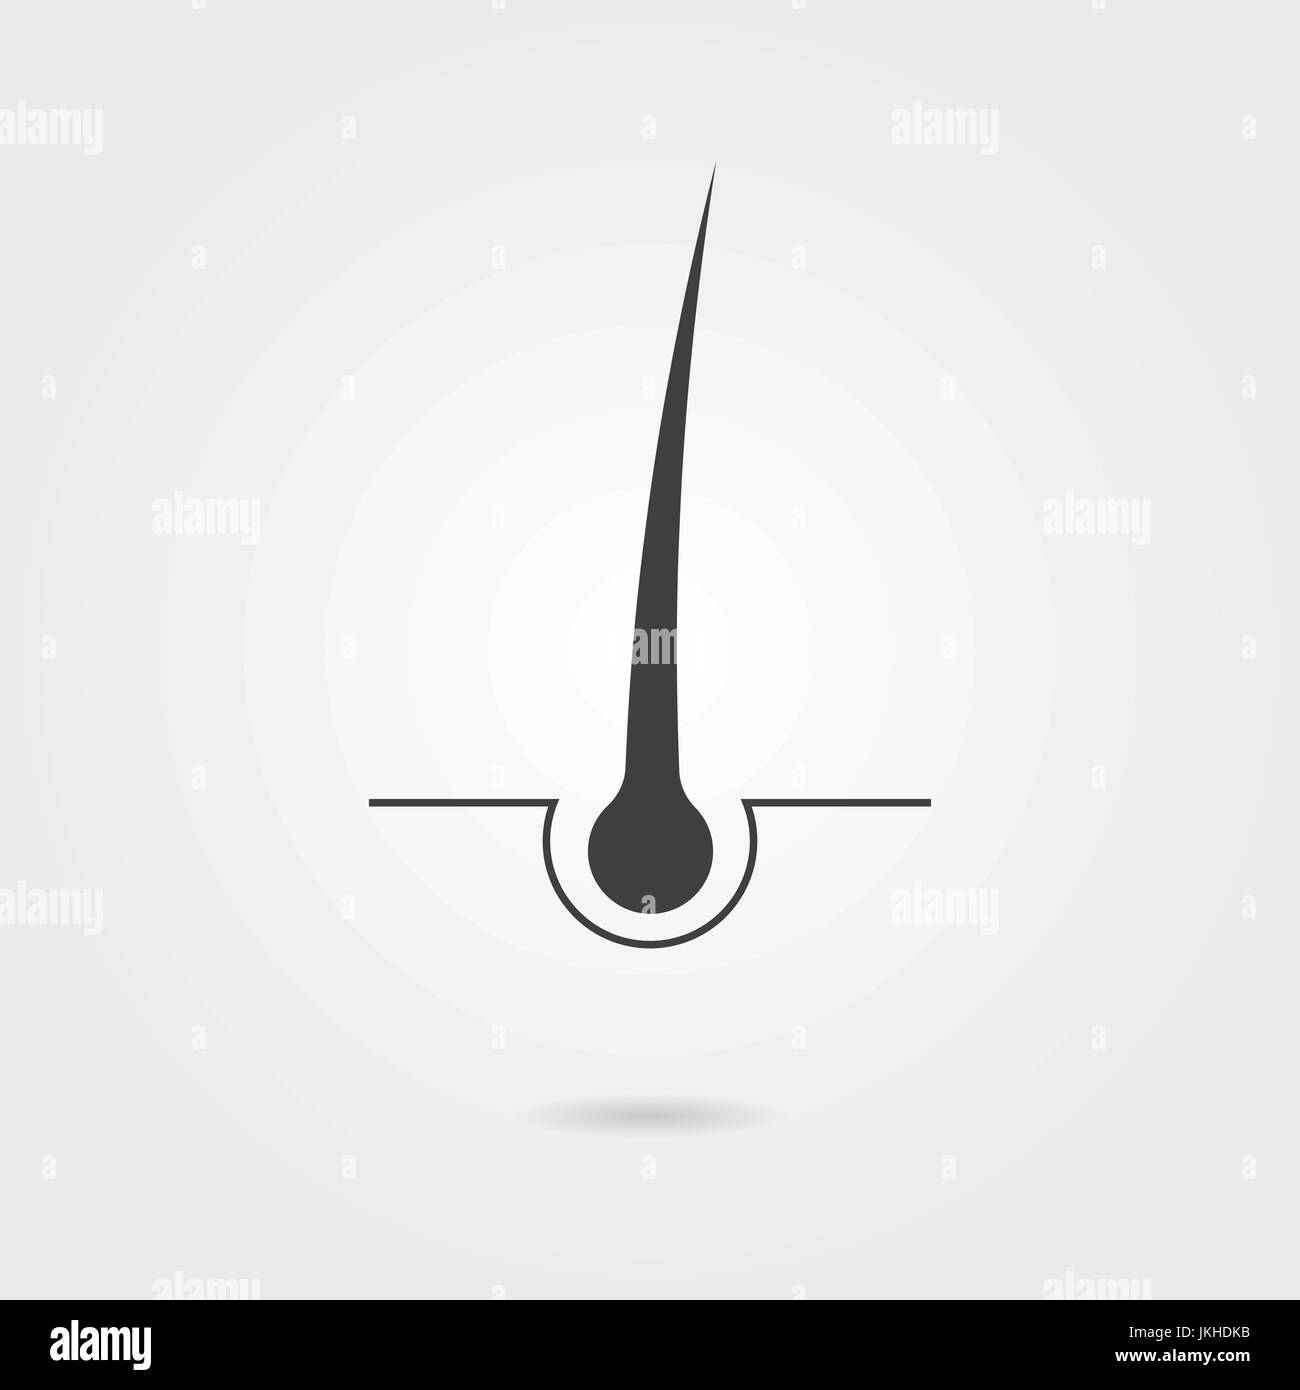 black hair follicle icon with shadow Stock Vector